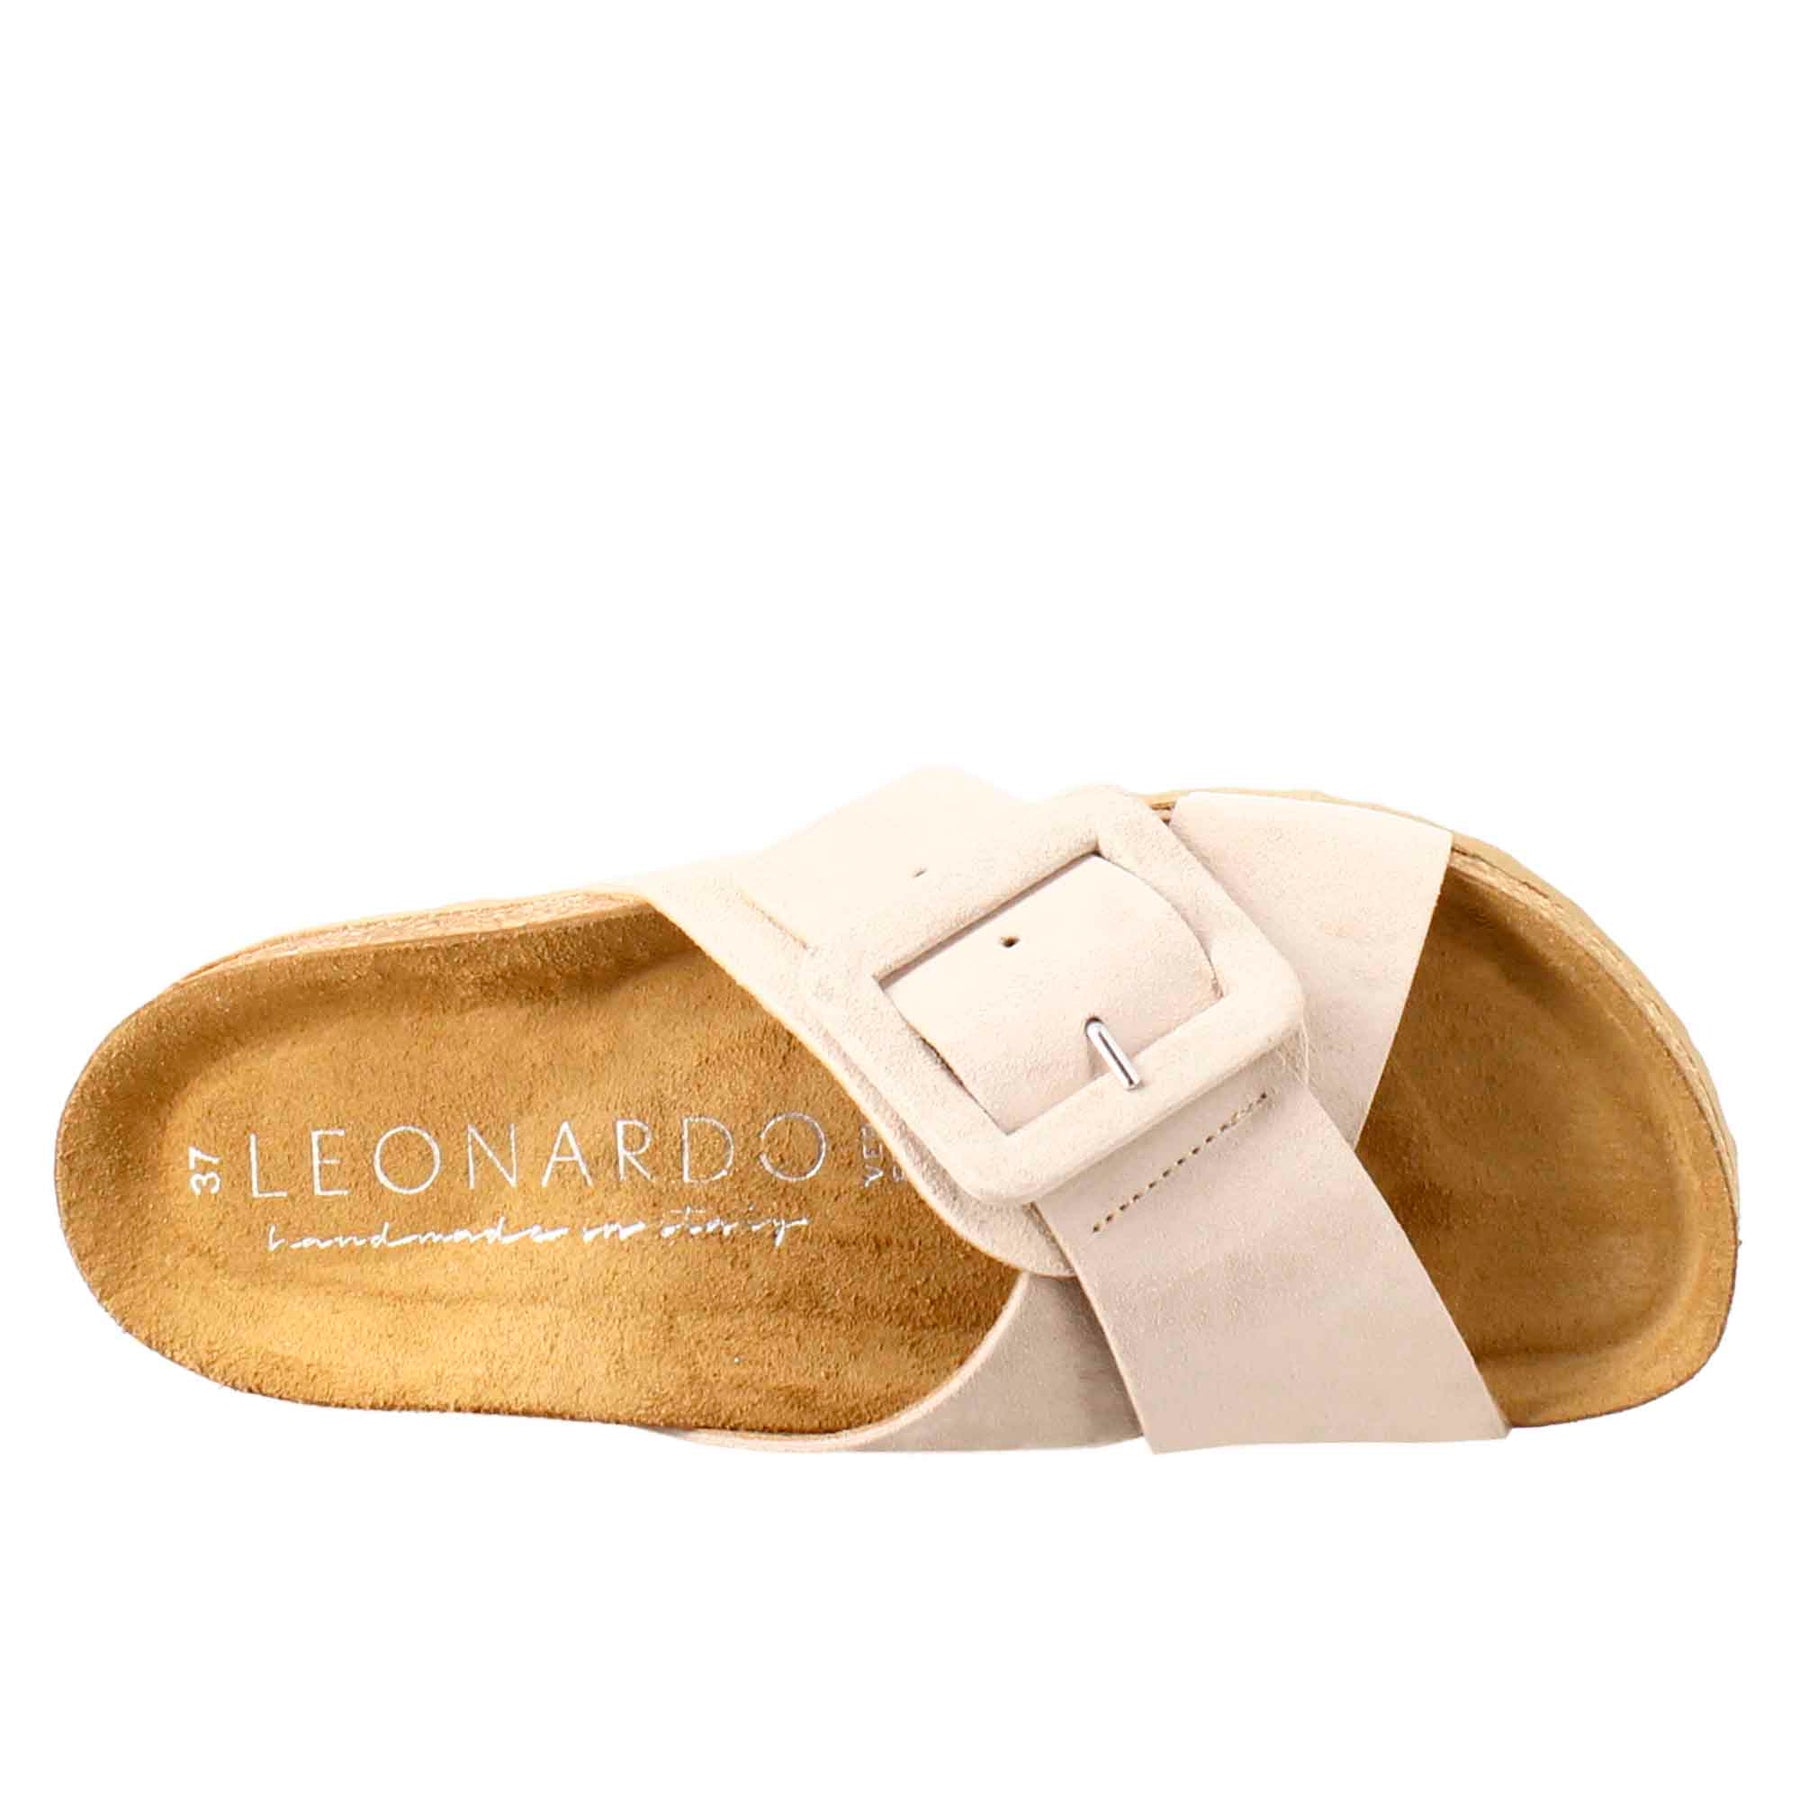 Woman's double band sandal and buckle in beige suede 